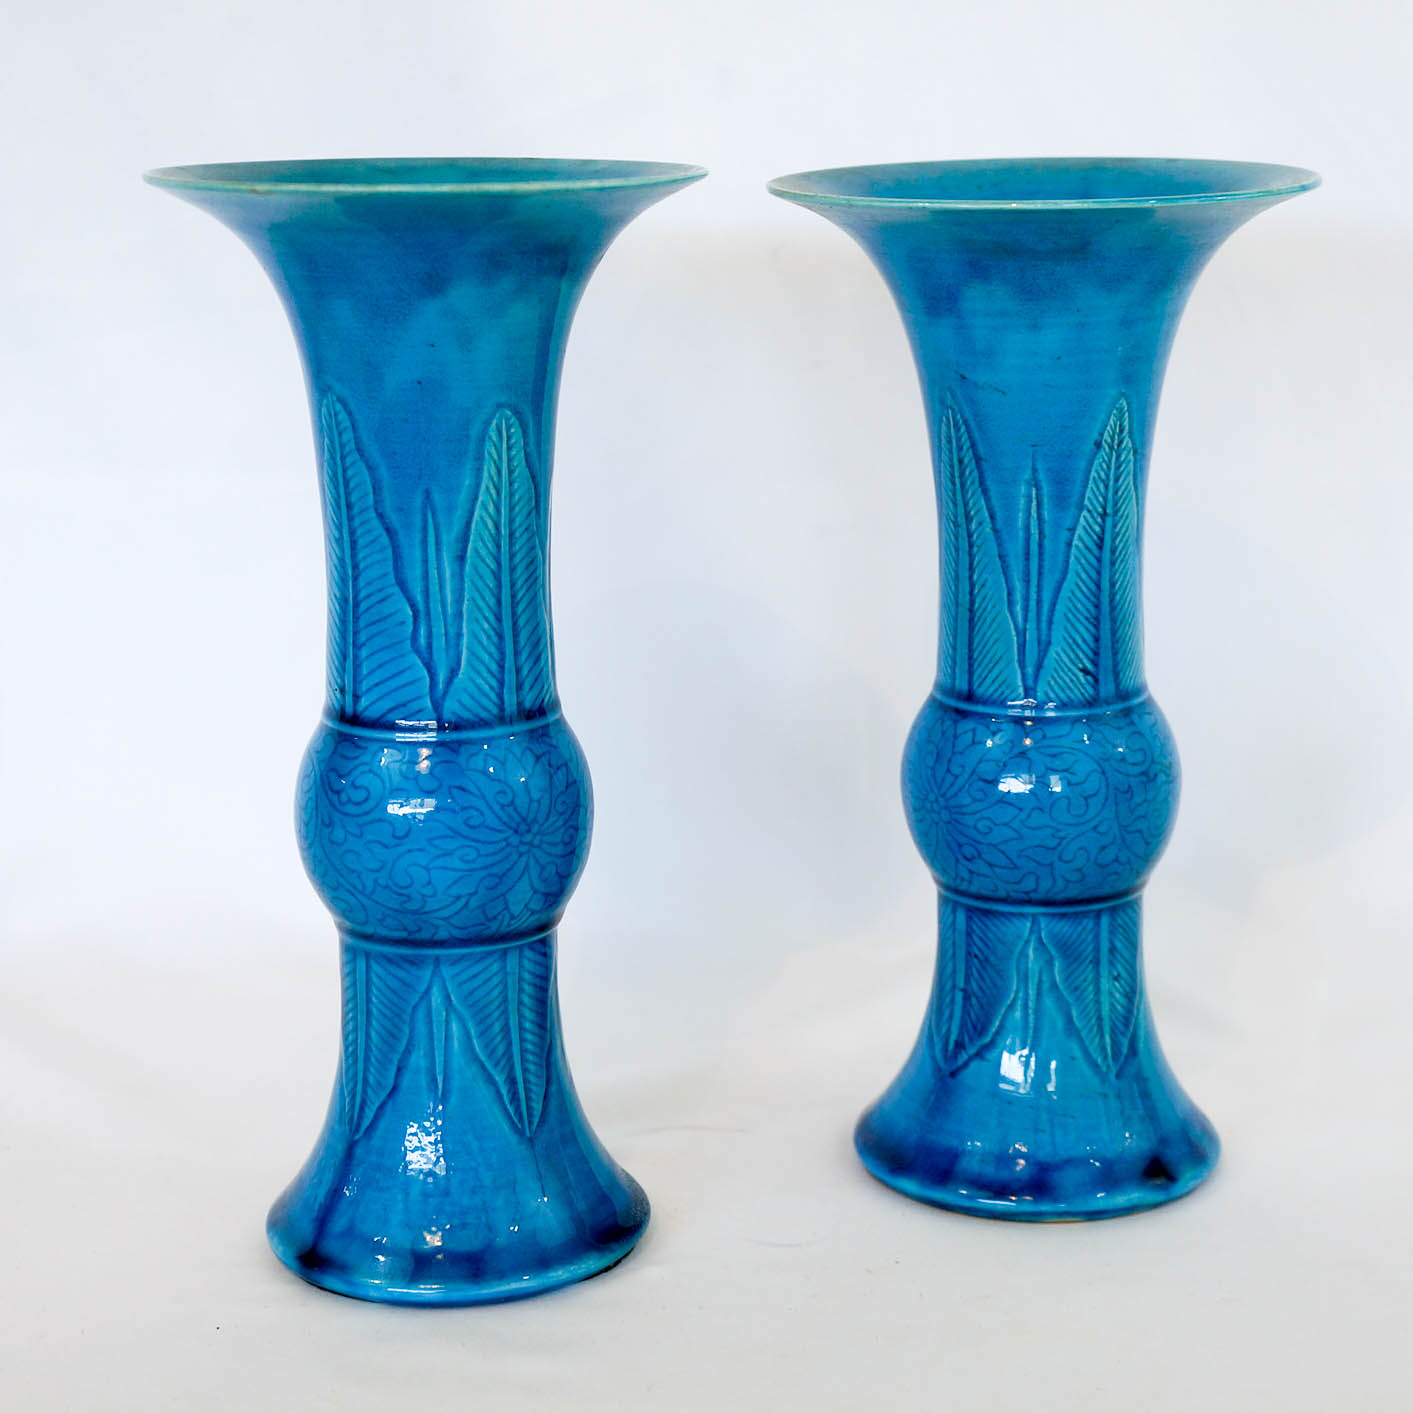 A Pair of Chinese Turquoise Glazed Gu Vases